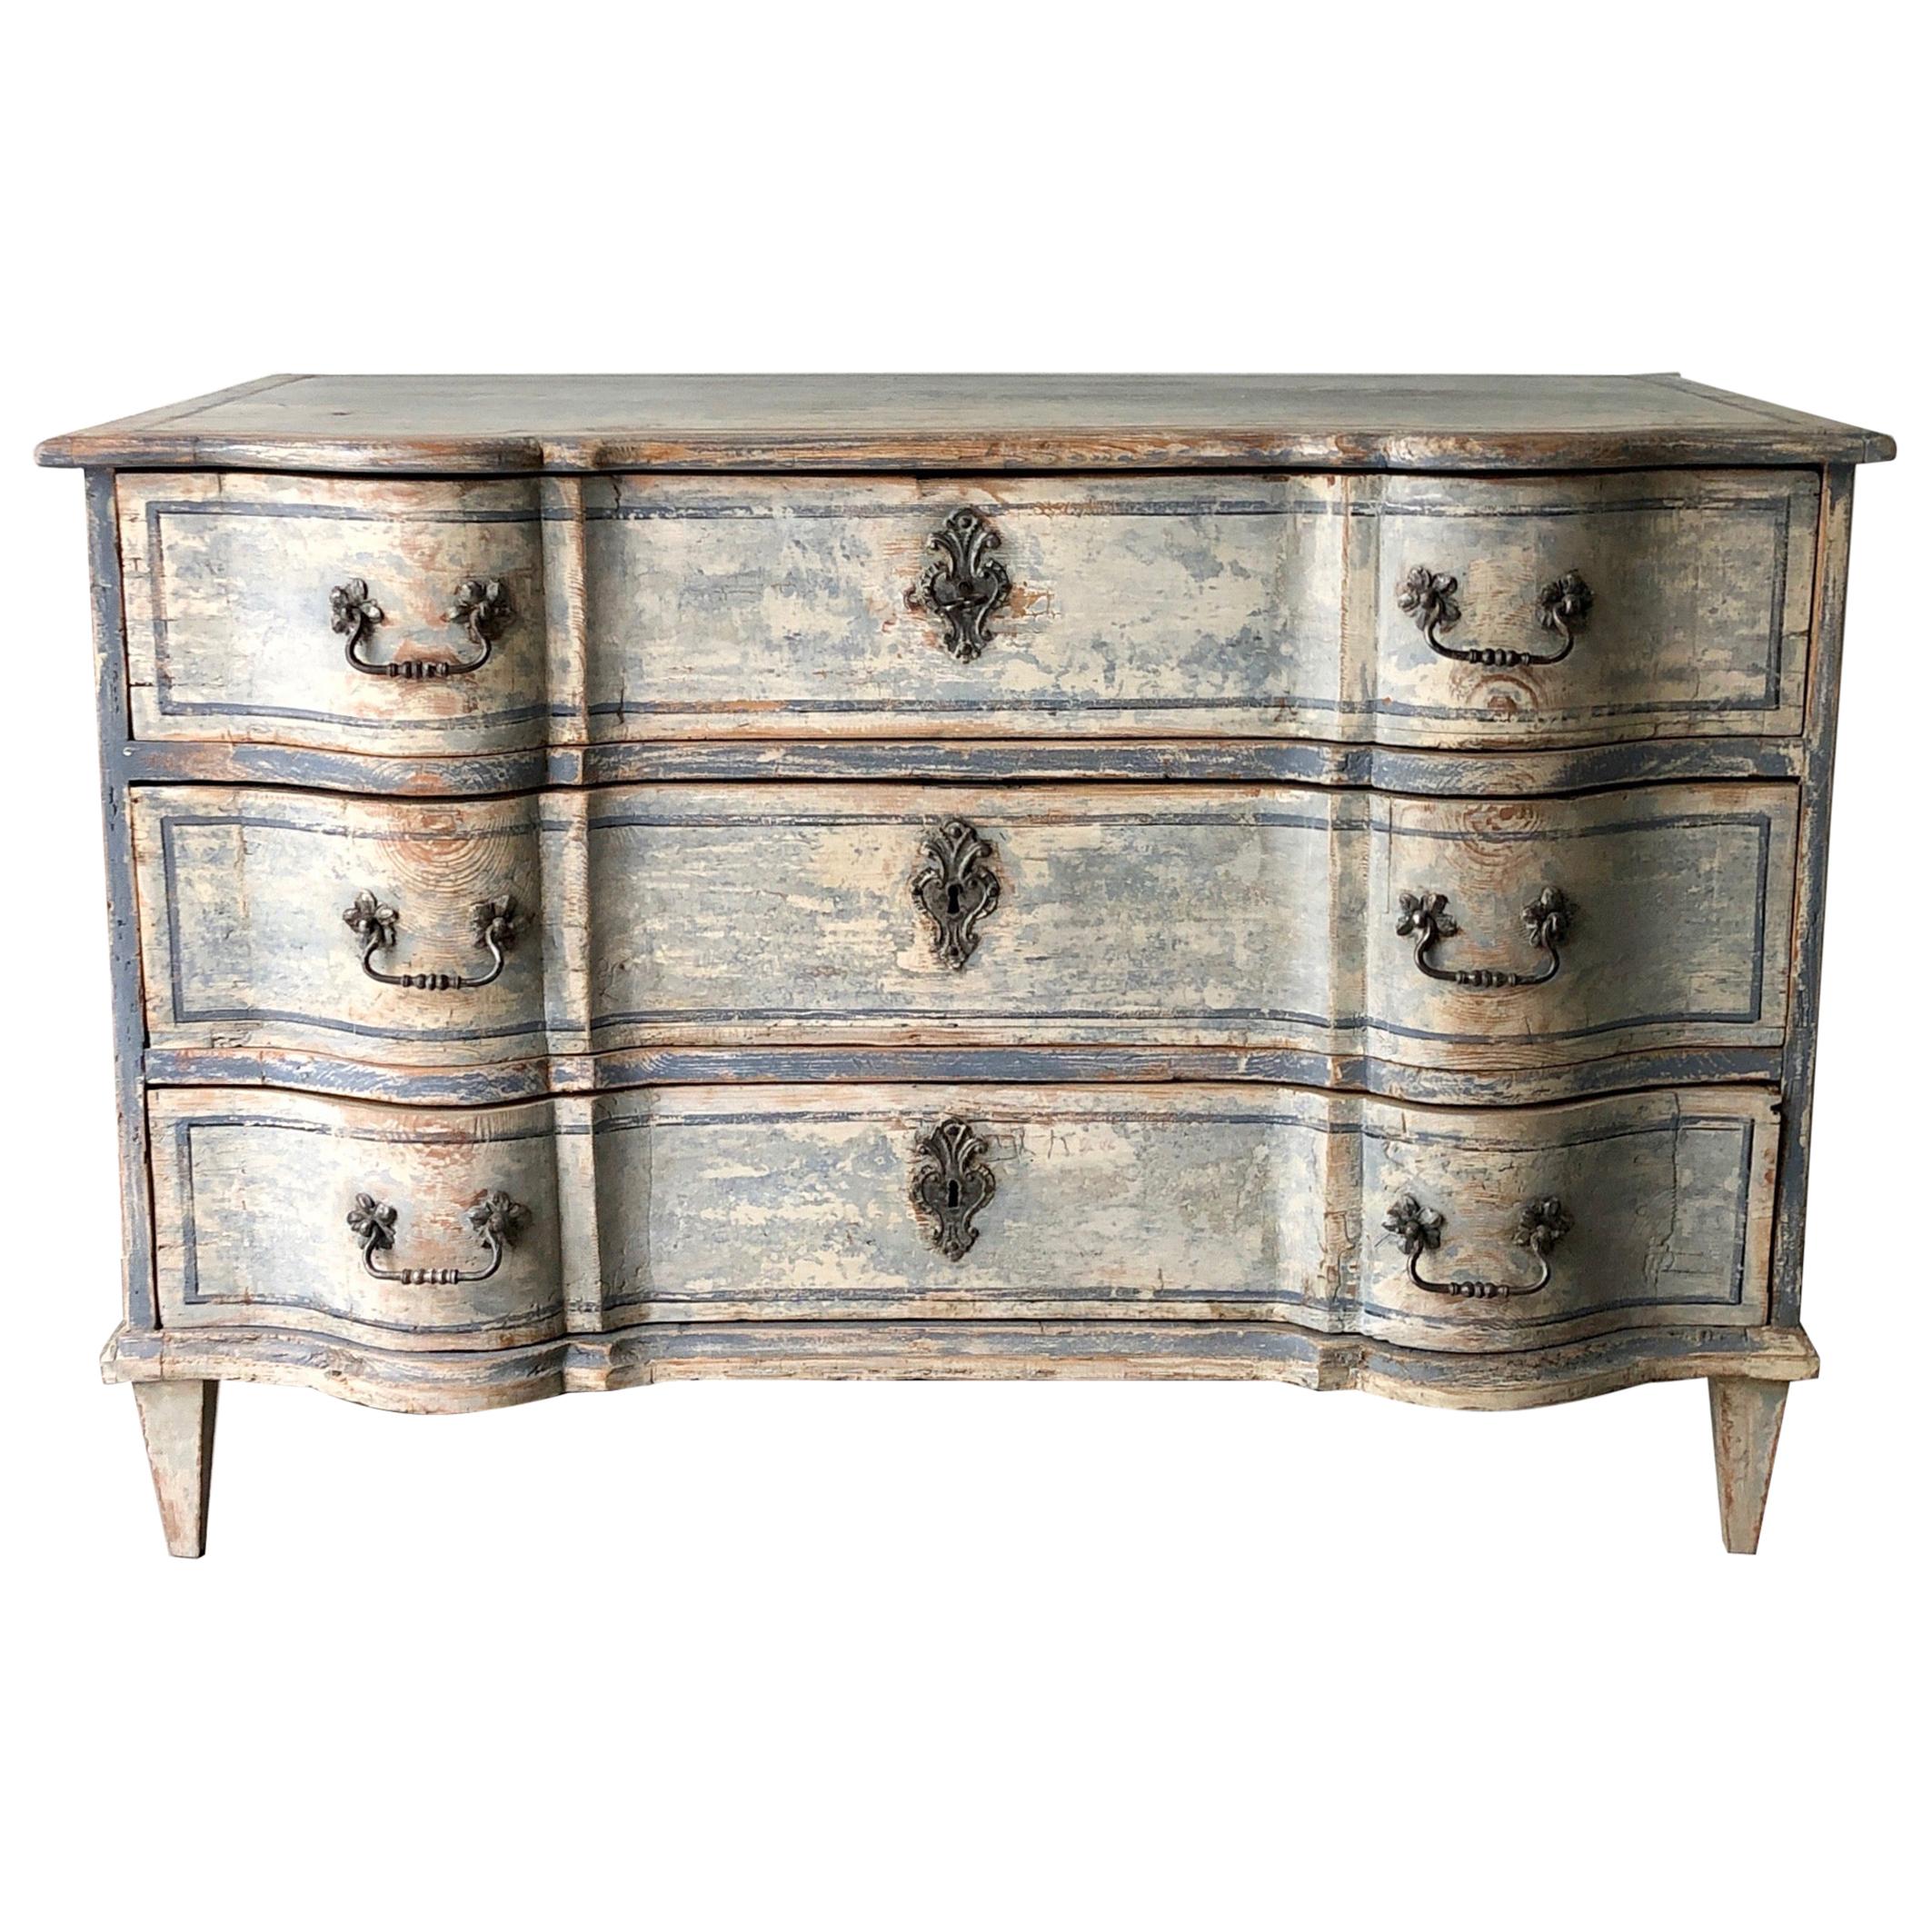 18th Century Serpentine Front Chest of Drawers